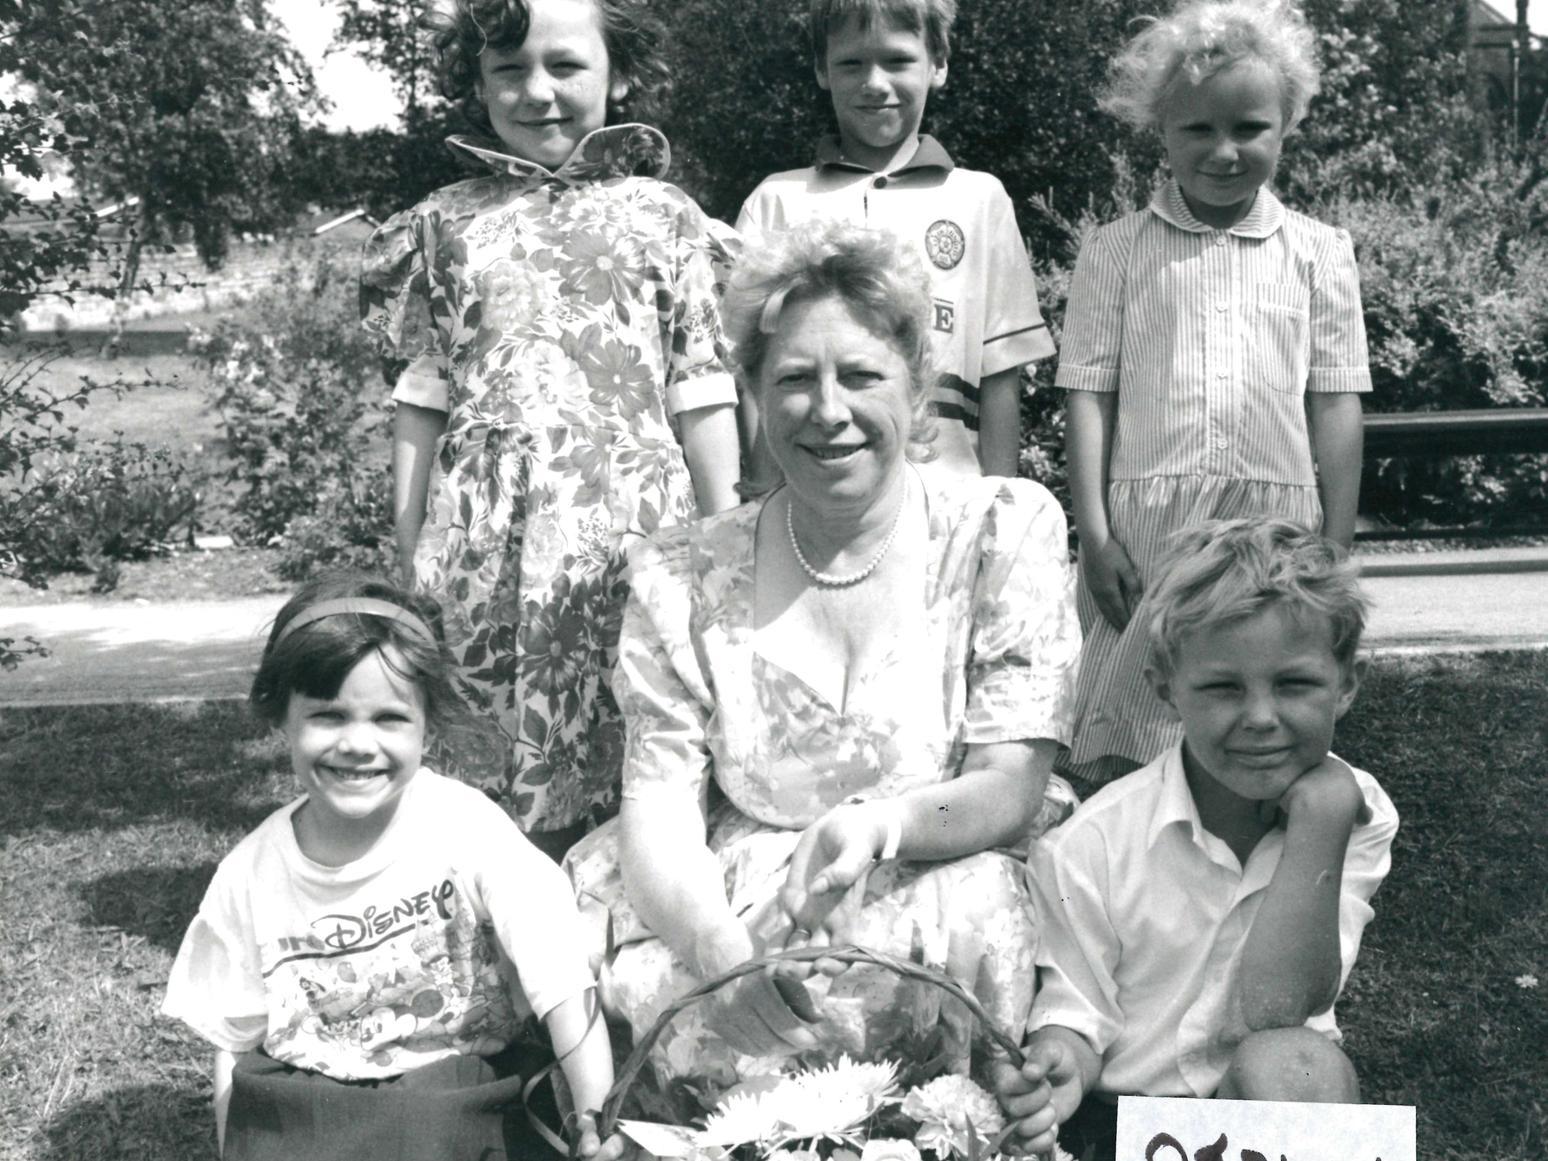 St Pauls School, Alverthorpe. Retirement of teacher Mrs Asquith. Published in the Wakefield Express 5.8.1994.